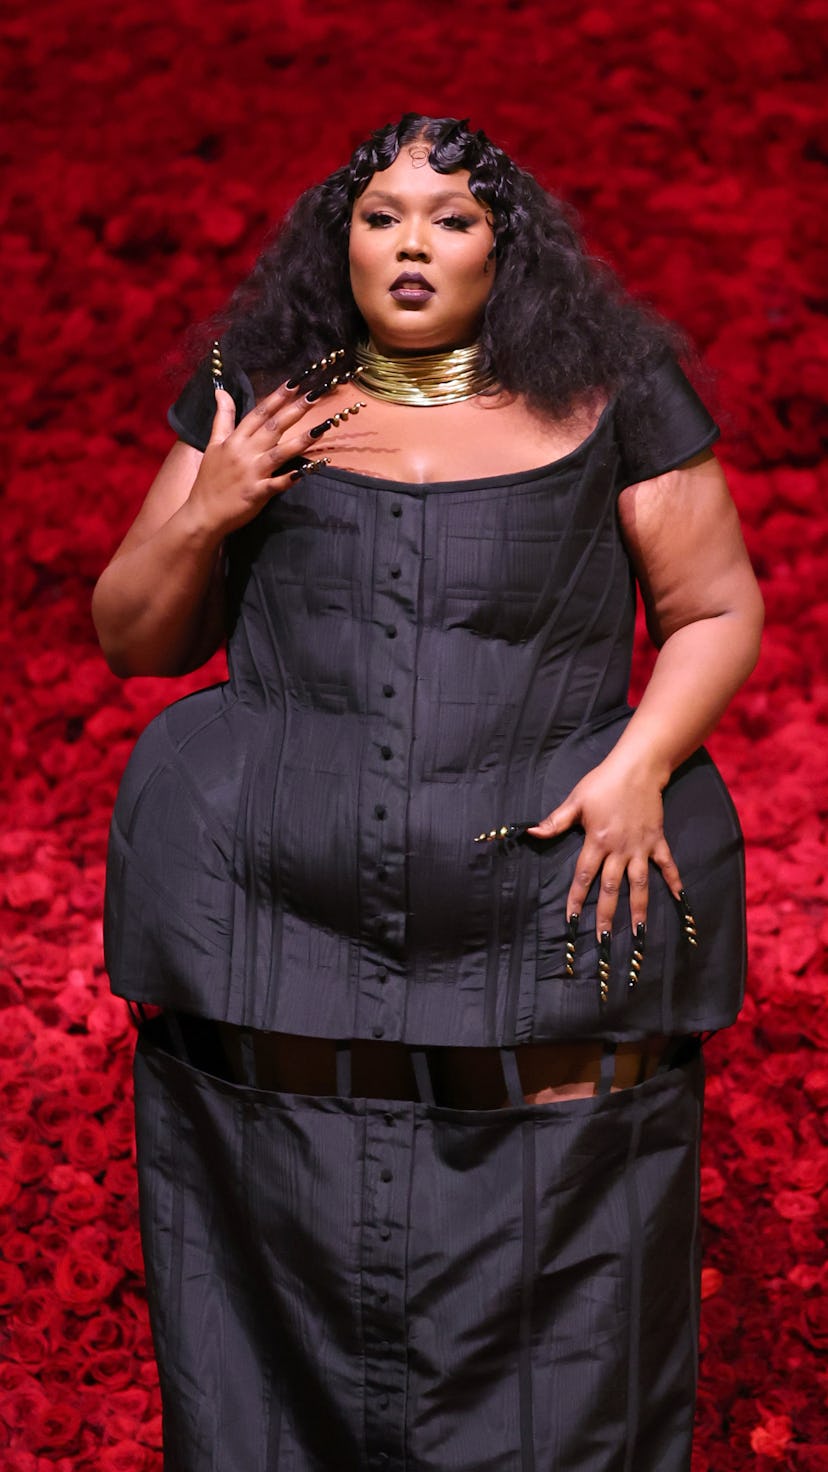 NEW YORK, NEW YORK - MAY 02: (Exclusive Coverage) Lizzo attends The 2022 Met Gala Celebrating "In Am...